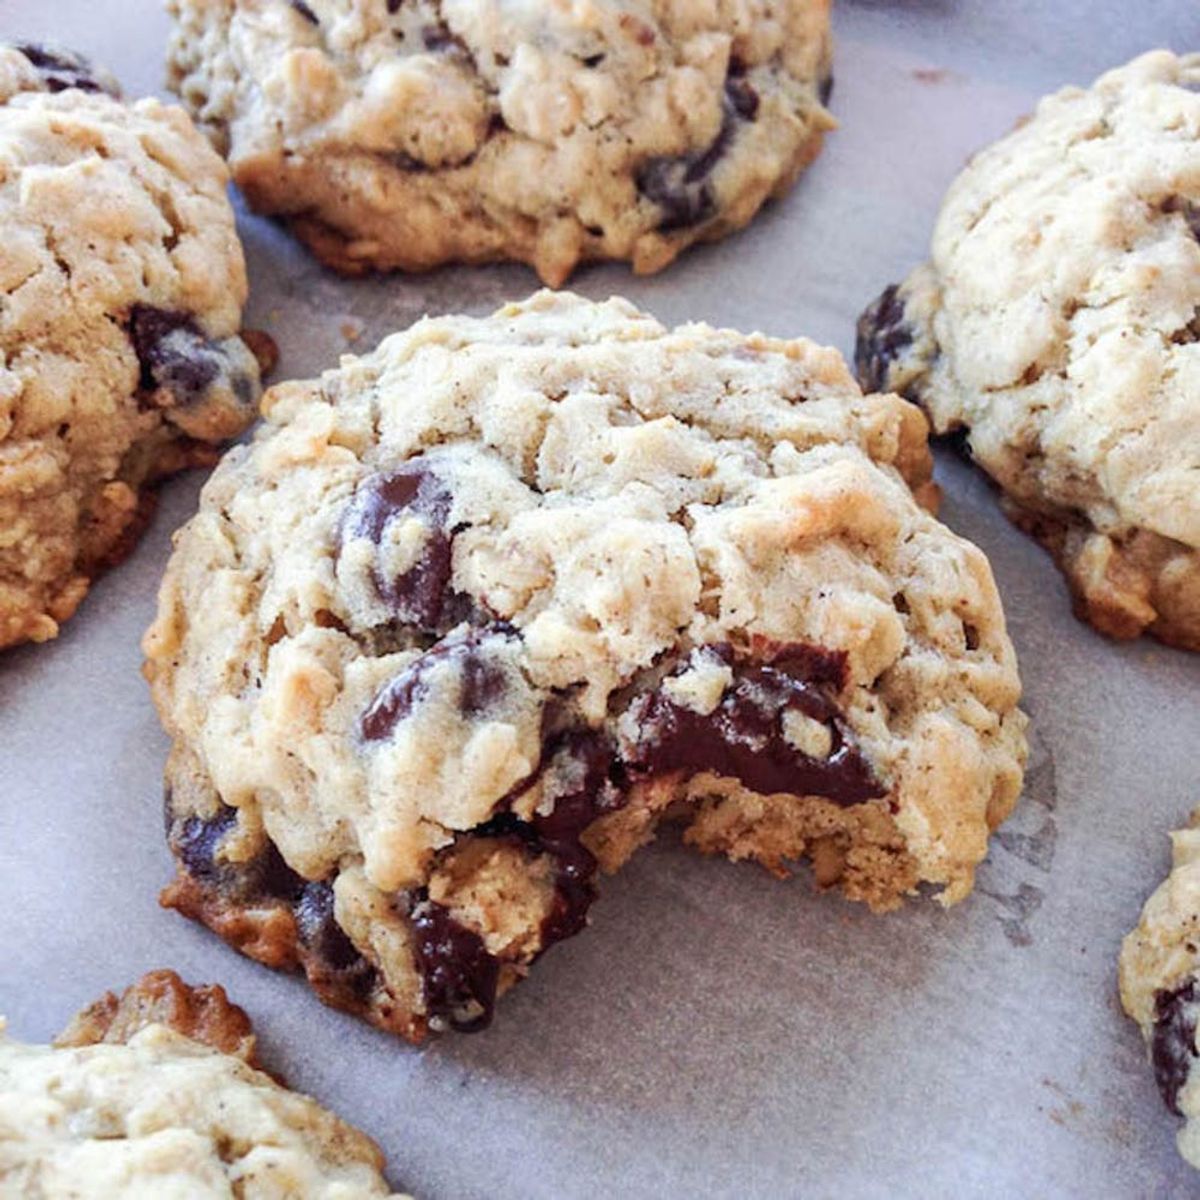 14 Lactation Cookies for New Moms